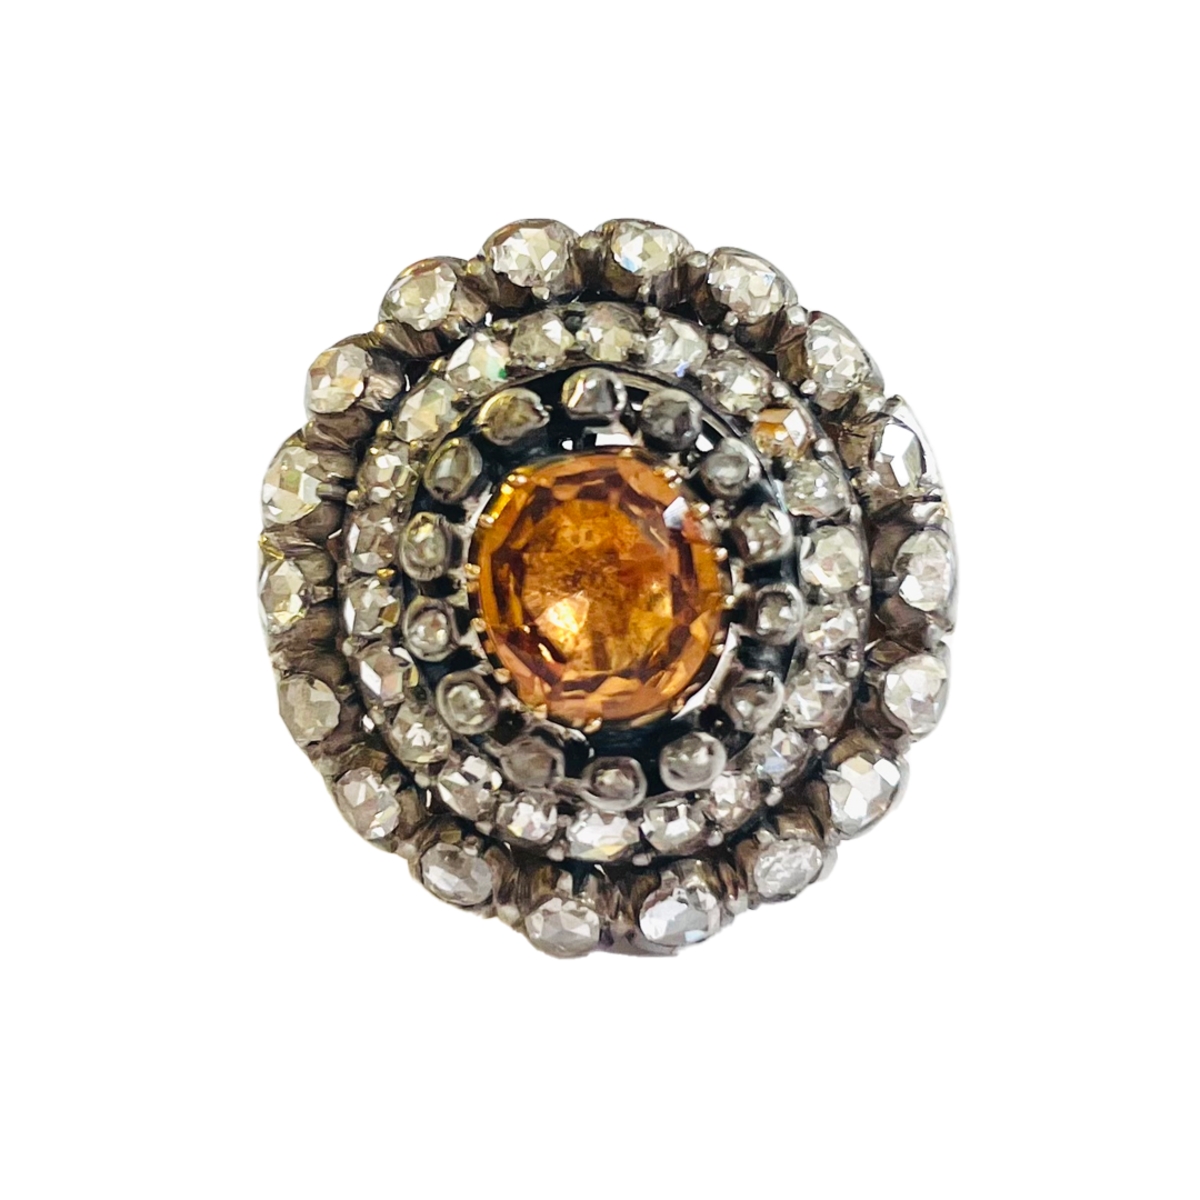 Antique Silver & 14KT Rose Gold Diamond & Imperial Topaz Ring front